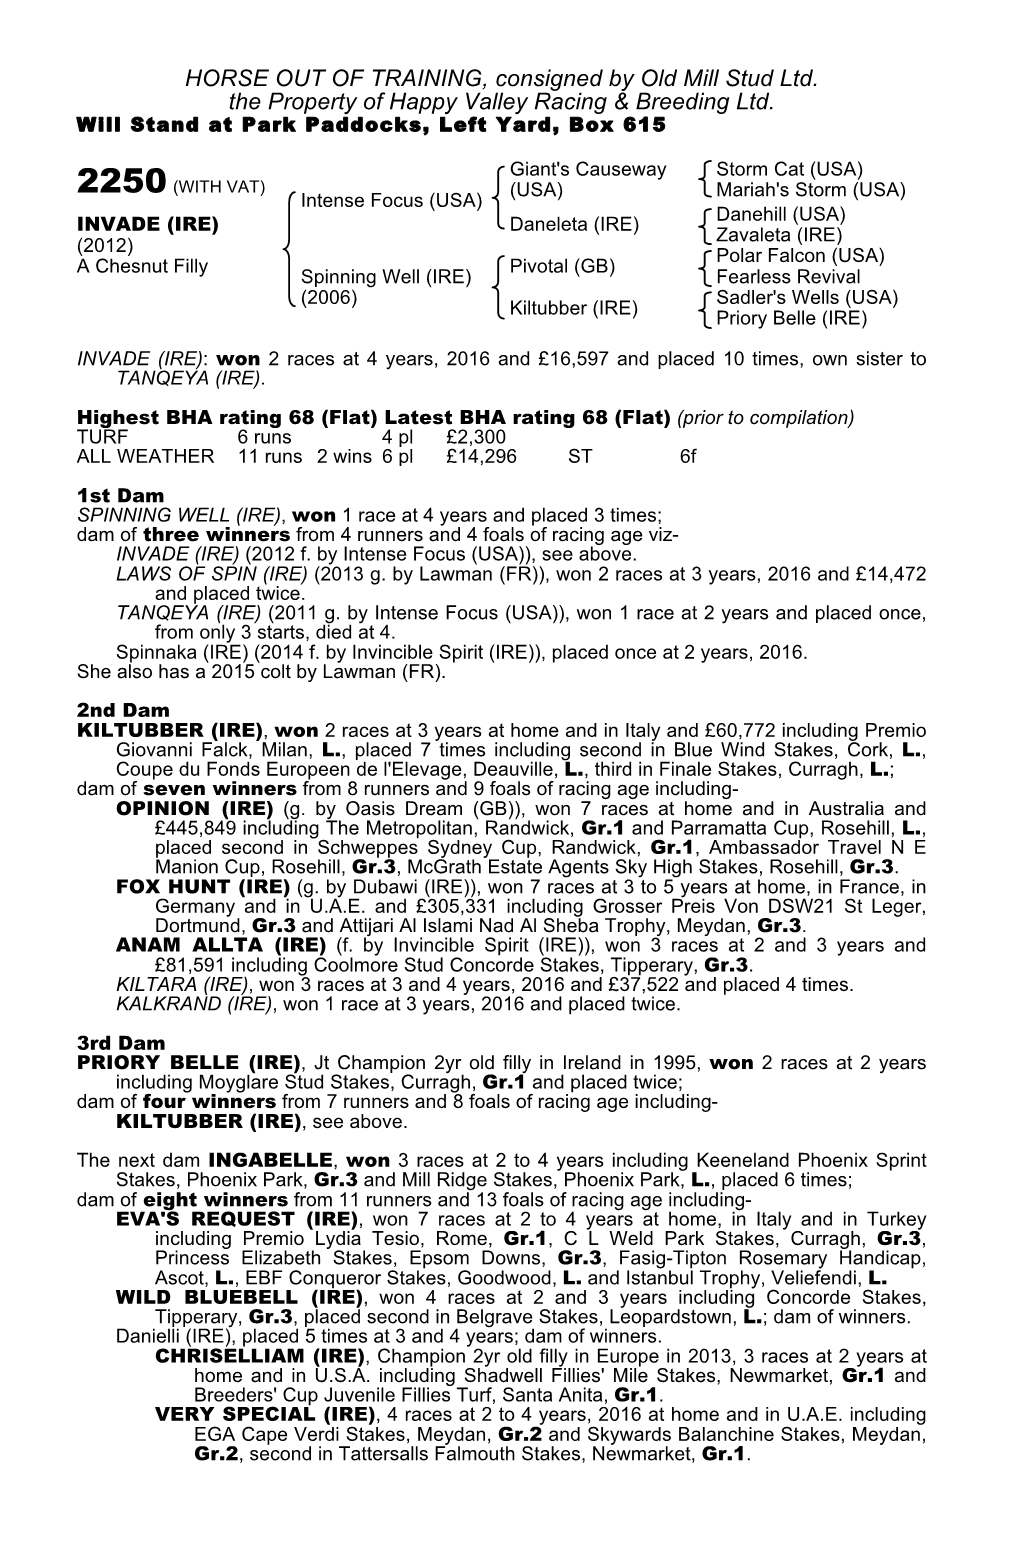 HORSE out of TRAINING, Consigned by Old Mill Stud Ltd. the Property of Happy Valley Racing & Breeding Ltd